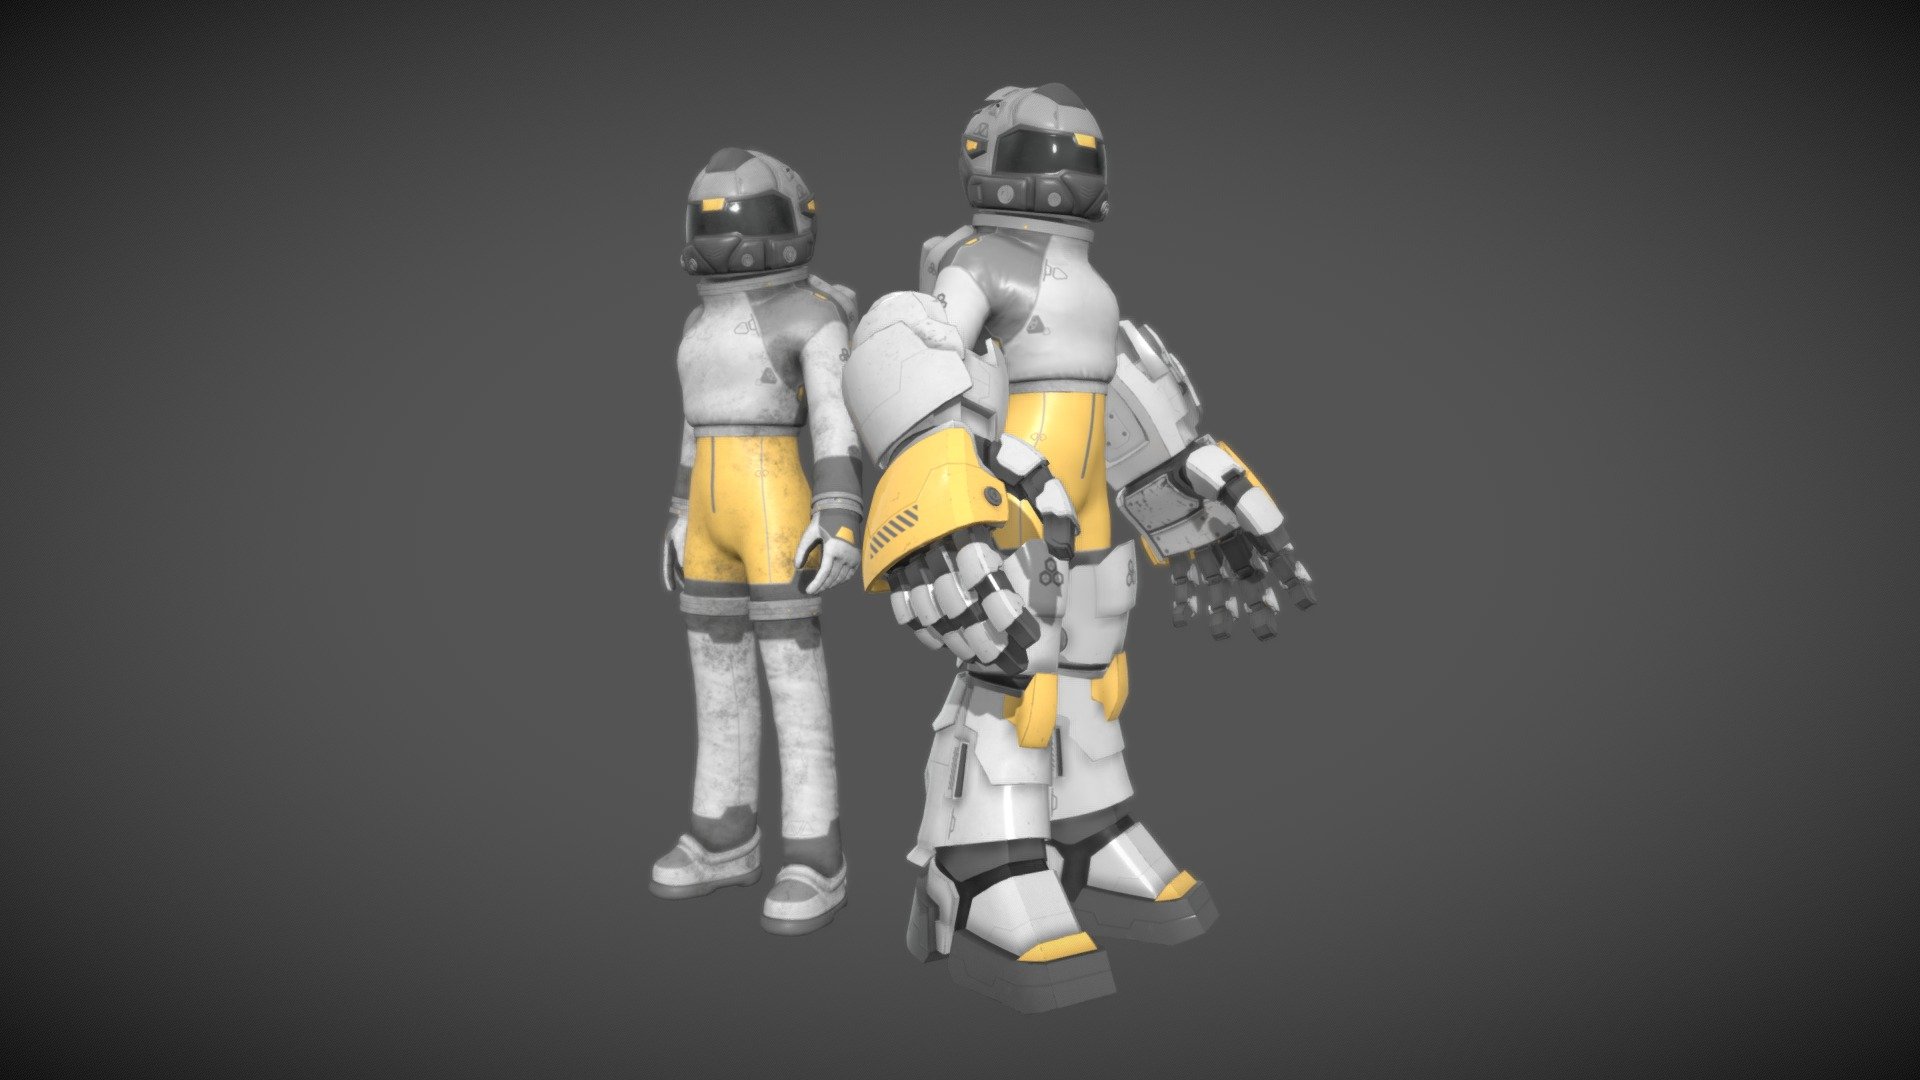 Asteria - Planet Explorer




Low poly

File: blend, Fbx, Obj

I made this model in Blender 3.4.1 version

Rigged Asteria

No animation

PBR Texture 6x4k 

Dirty and normal textures

Verts: 26,275 Faces: 25,292 Tris: 51,412 (Asteria with Mecha Arm and Leg)
 - Asteria - Low Poly Character - Buy Royalty Free 3D model by Tara Turu Studio (@taraturustudio) 3d model